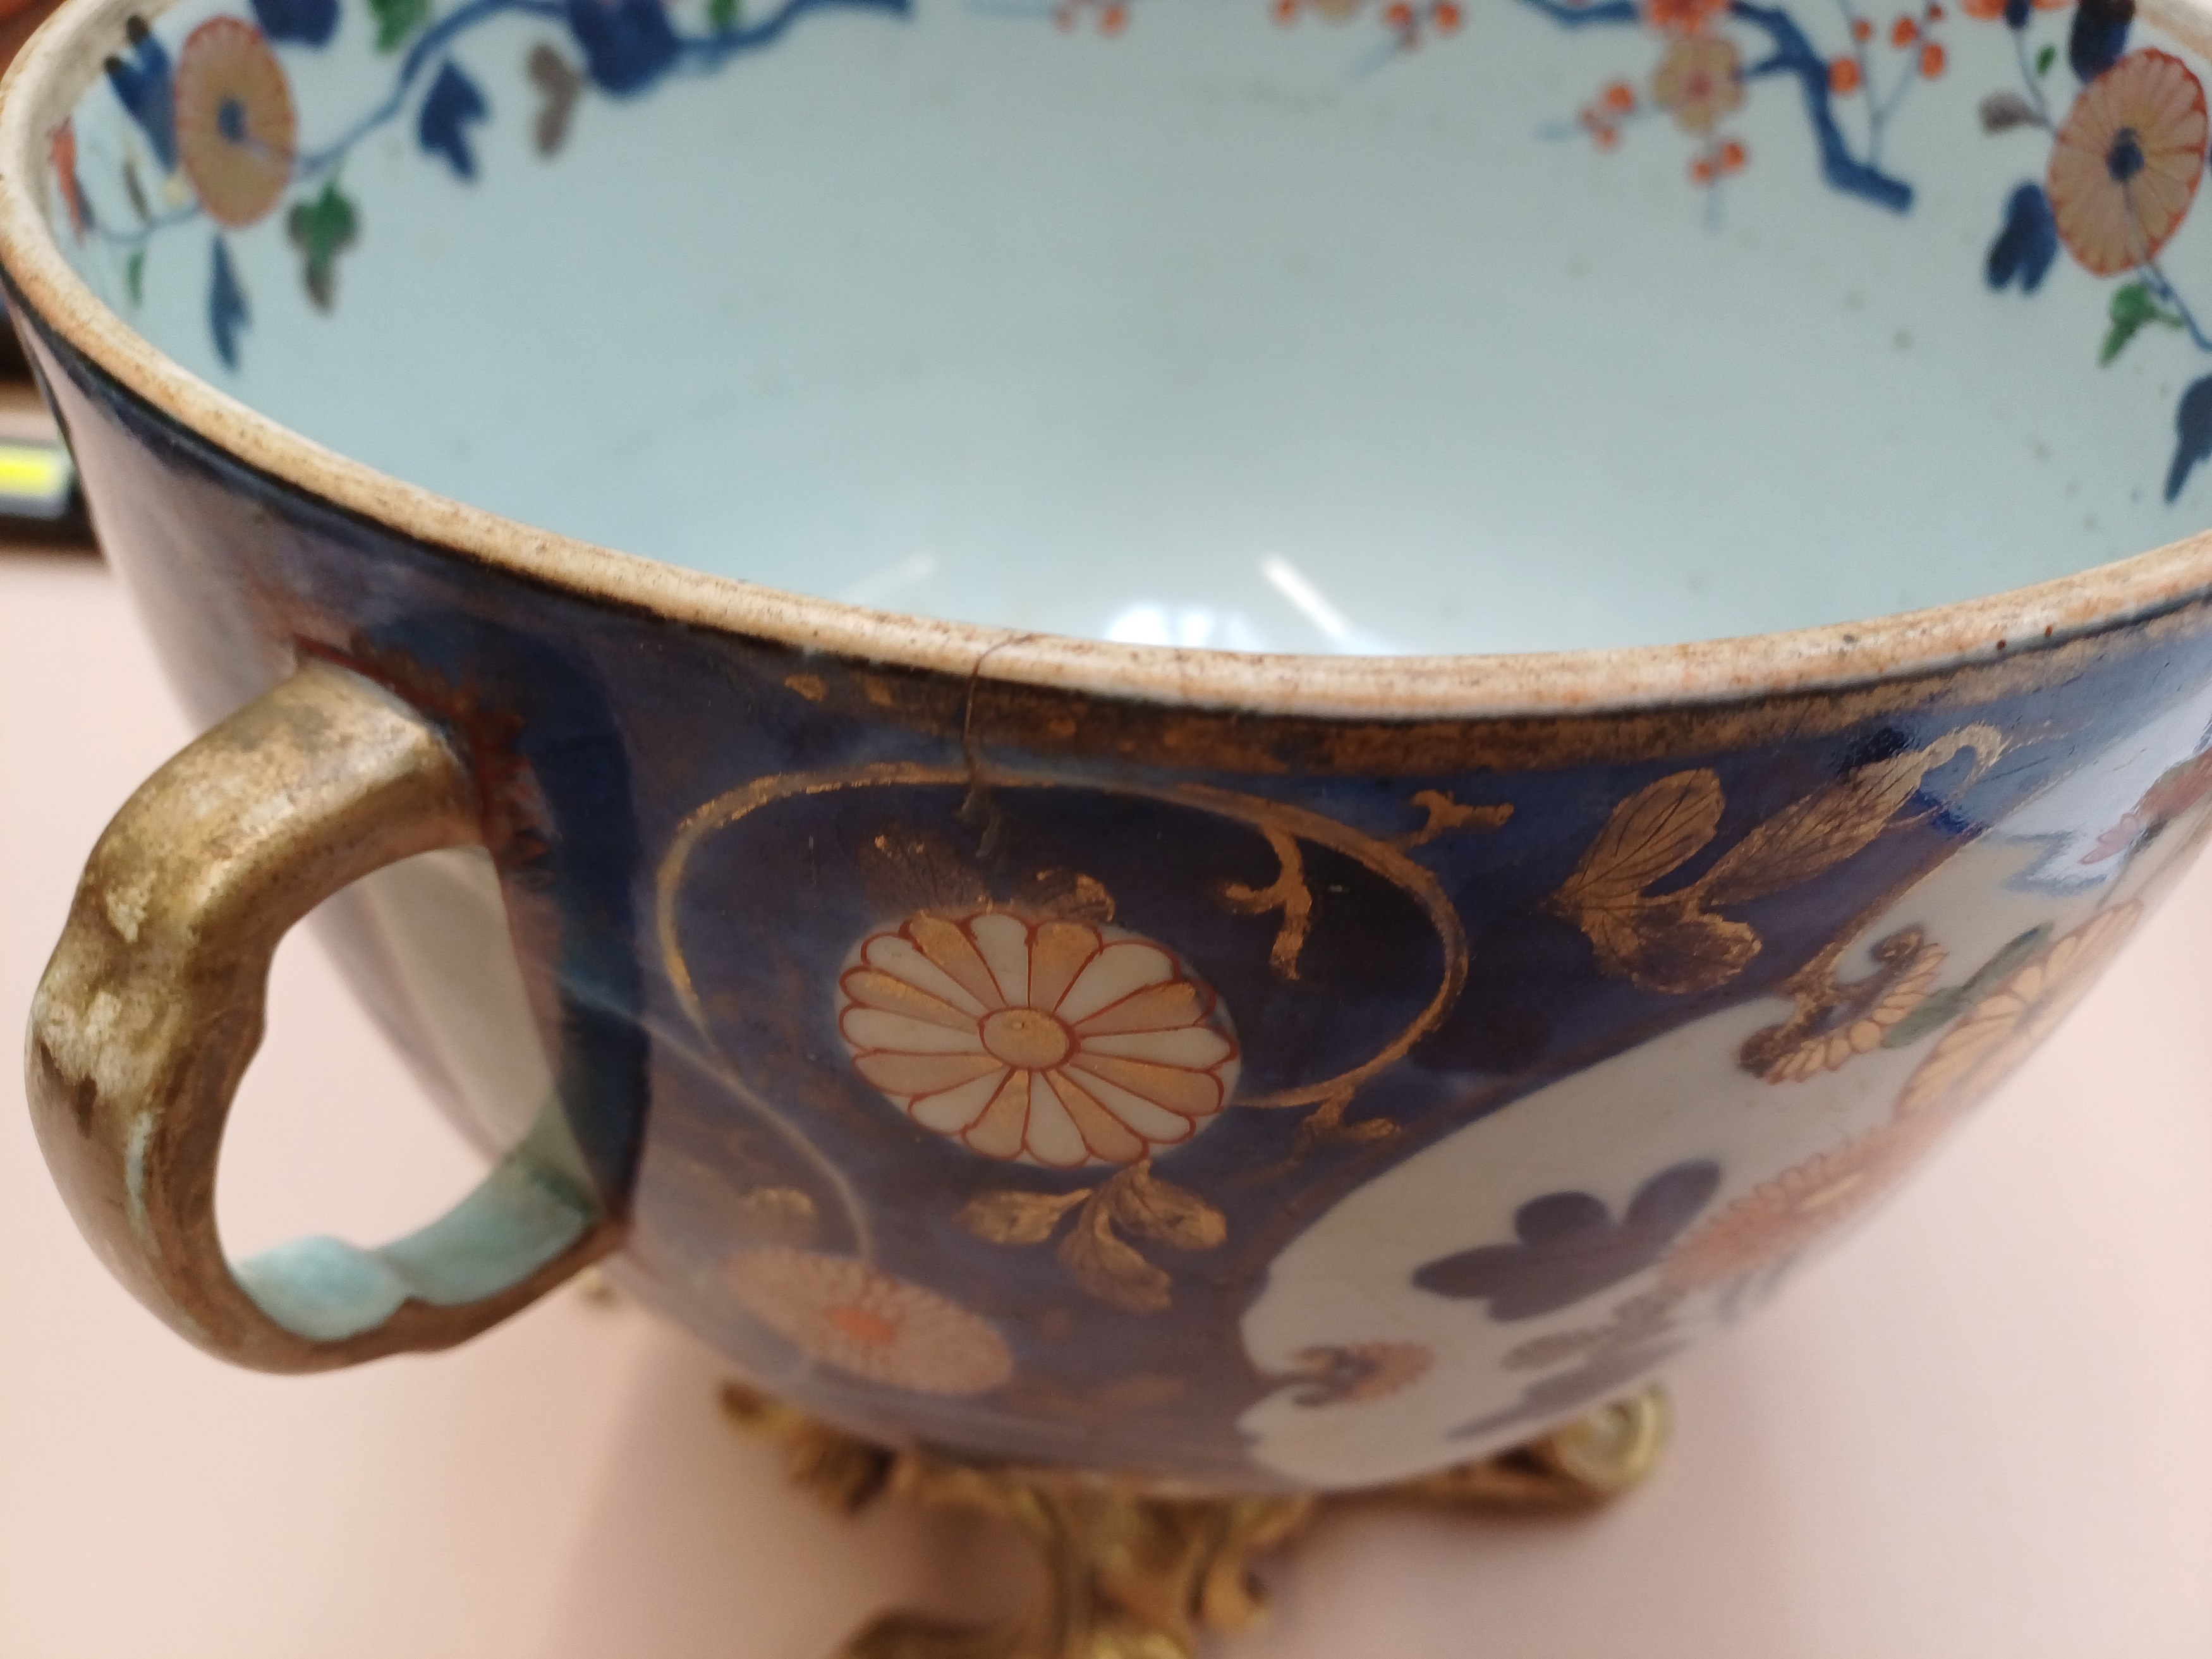 A JAPANESE IMARI POT, A FAMILLE-ROSE DISH, AND TWO JARDINIERES 十九至二十世紀 伊萬里罐，粉彩盤盆一對 - Image 14 of 17